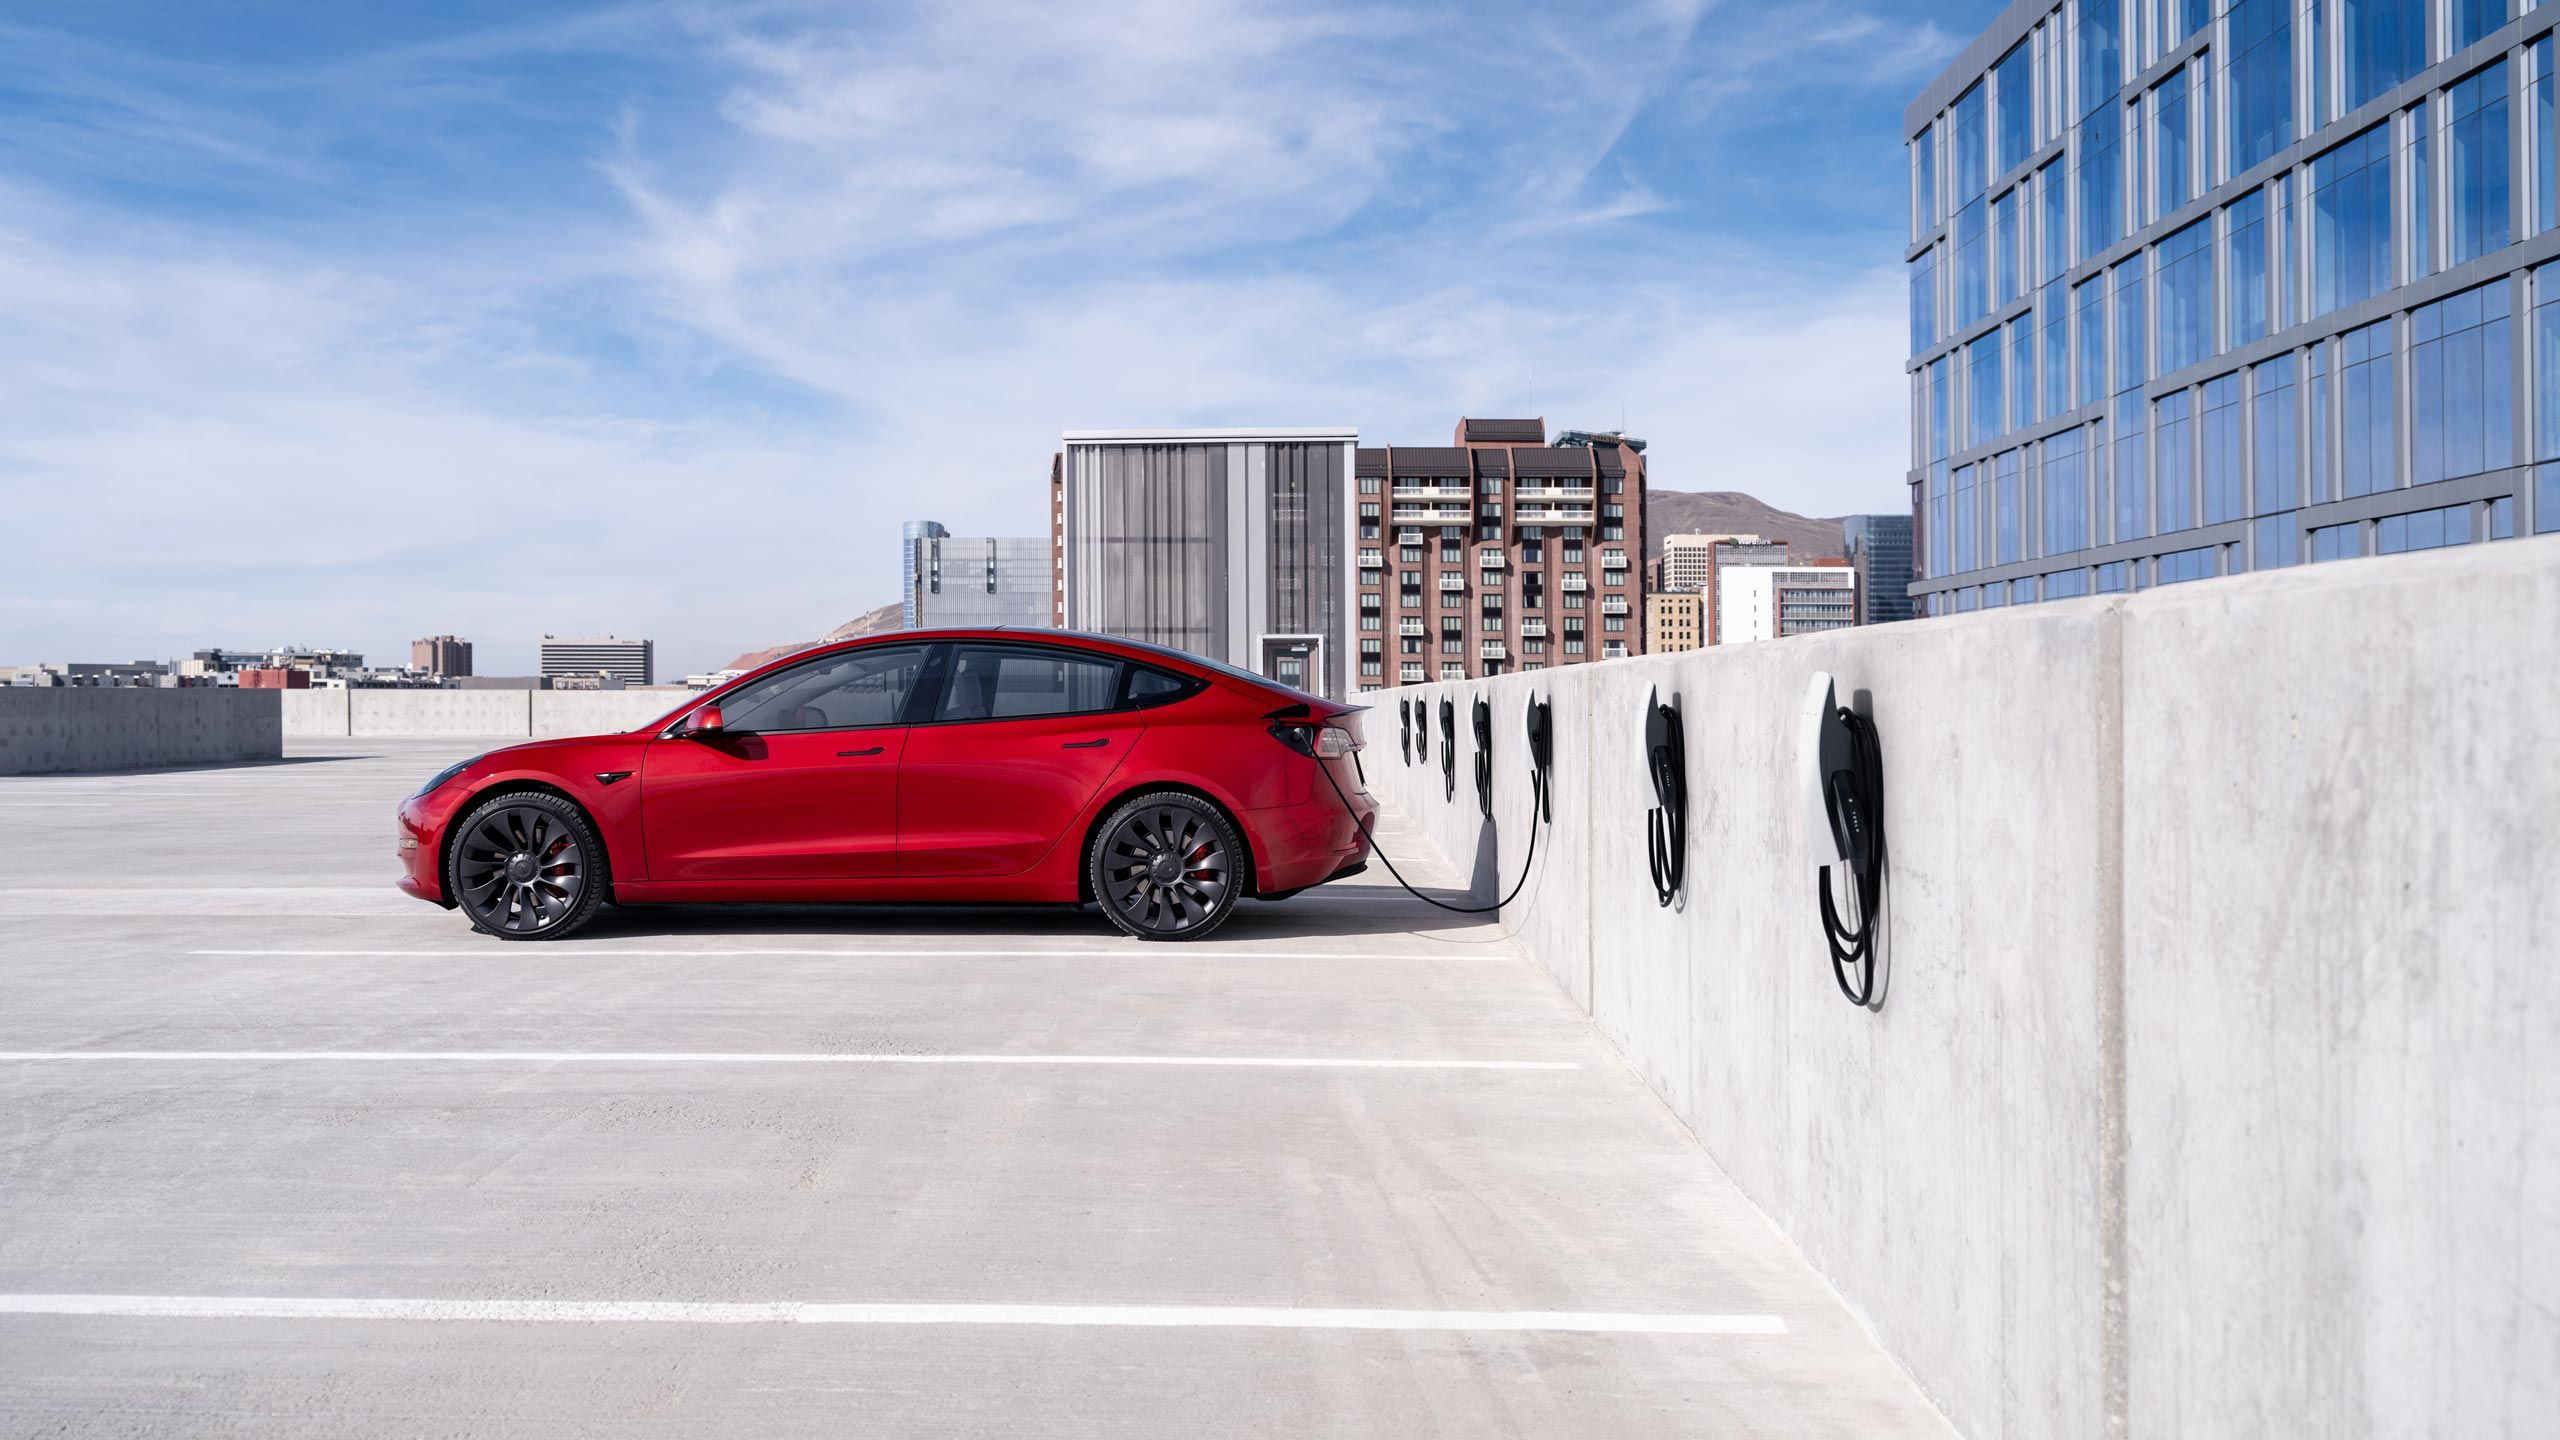 A red Tesla Model 3 charges on a rooftop parking garage